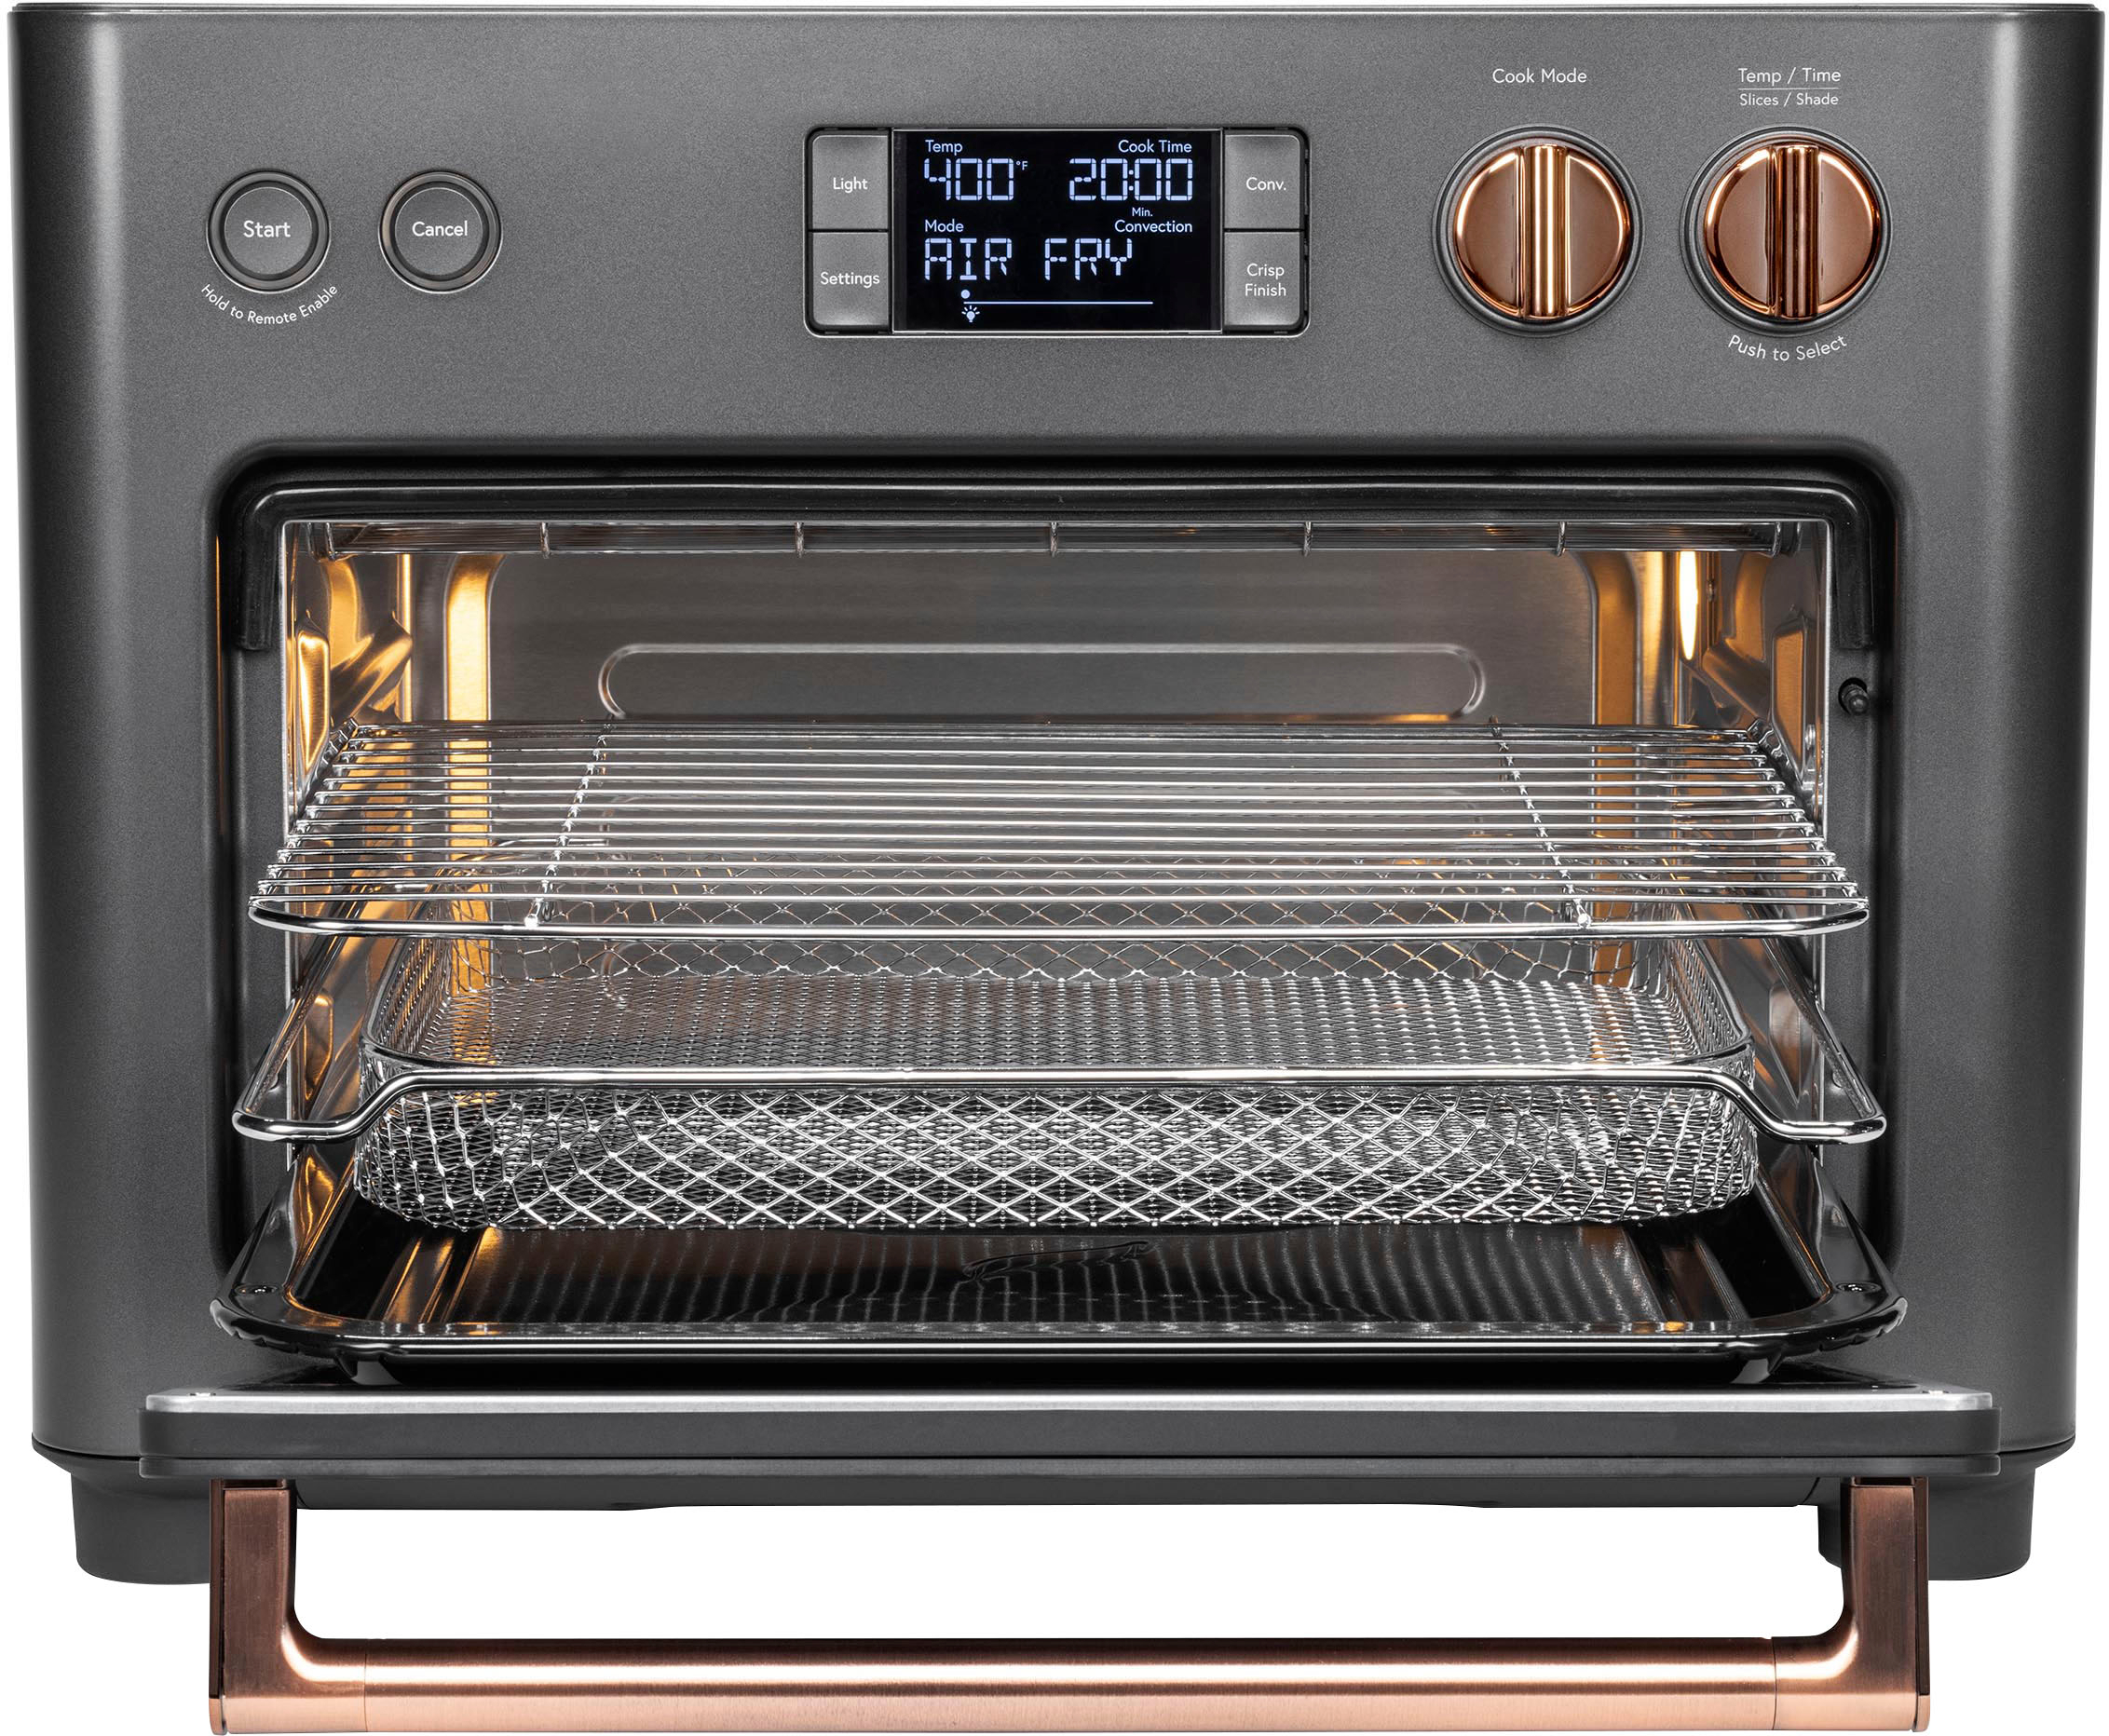 Café Couture Smart Toaster Oven with Air Fry Stainless Steel C9OAAAS2RS3 -  Best Buy